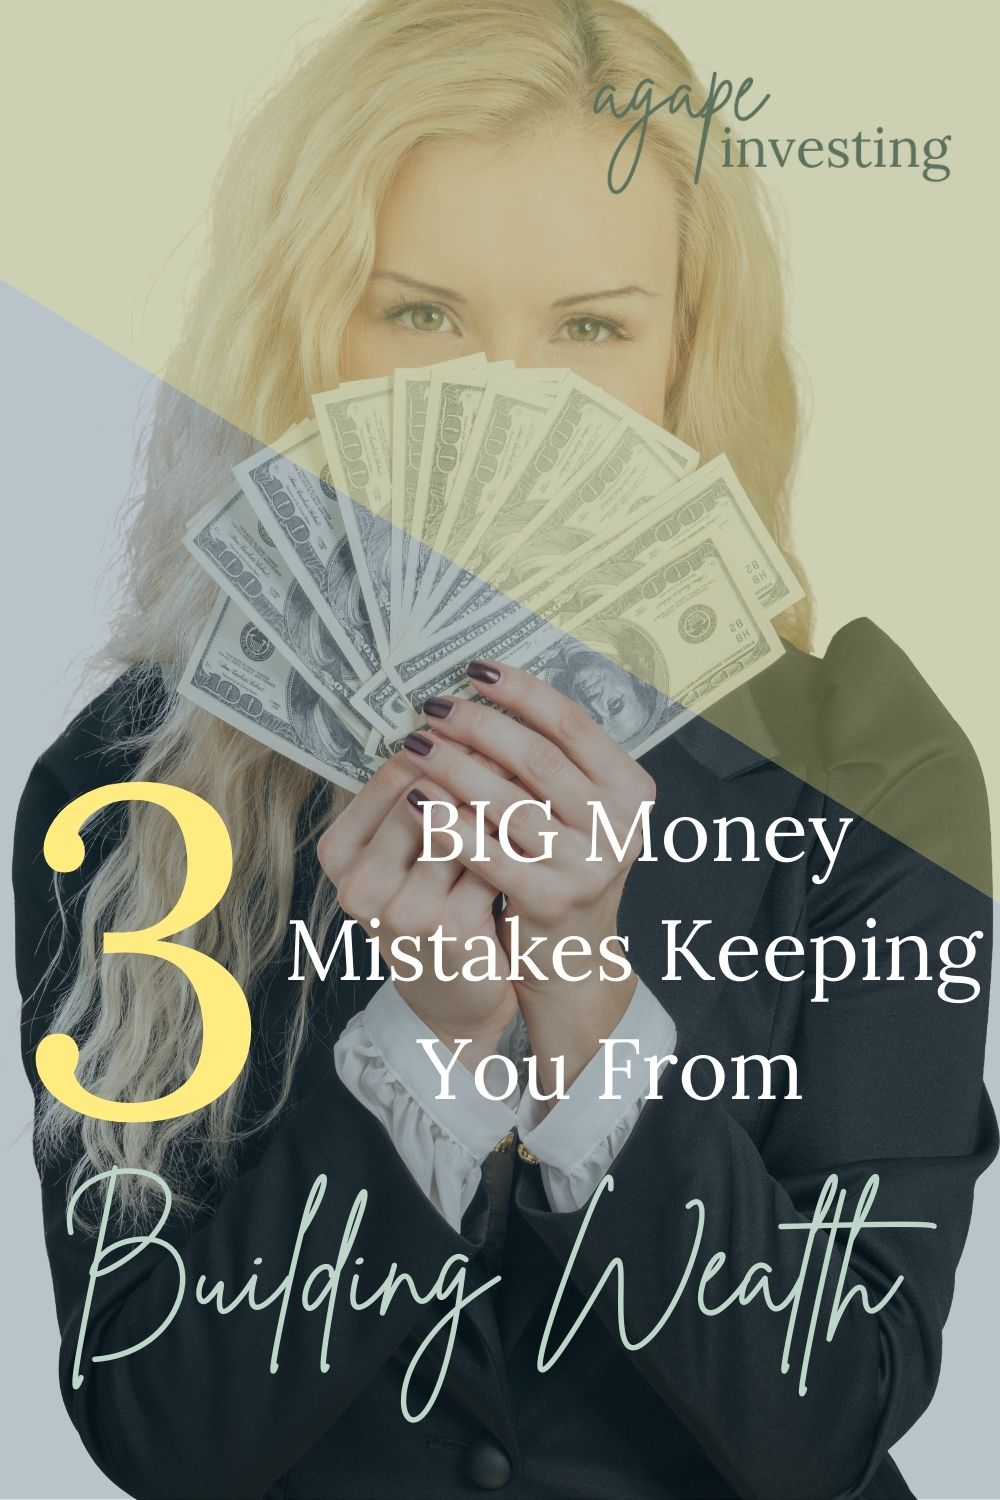 Building wealth starts with some simple changes to your money habits. If you are making these 3 big money mistakes, you will never be able to master your money and become financially independent. The good news is that they are not difficult to fix! #moneymistakes #buildwealth